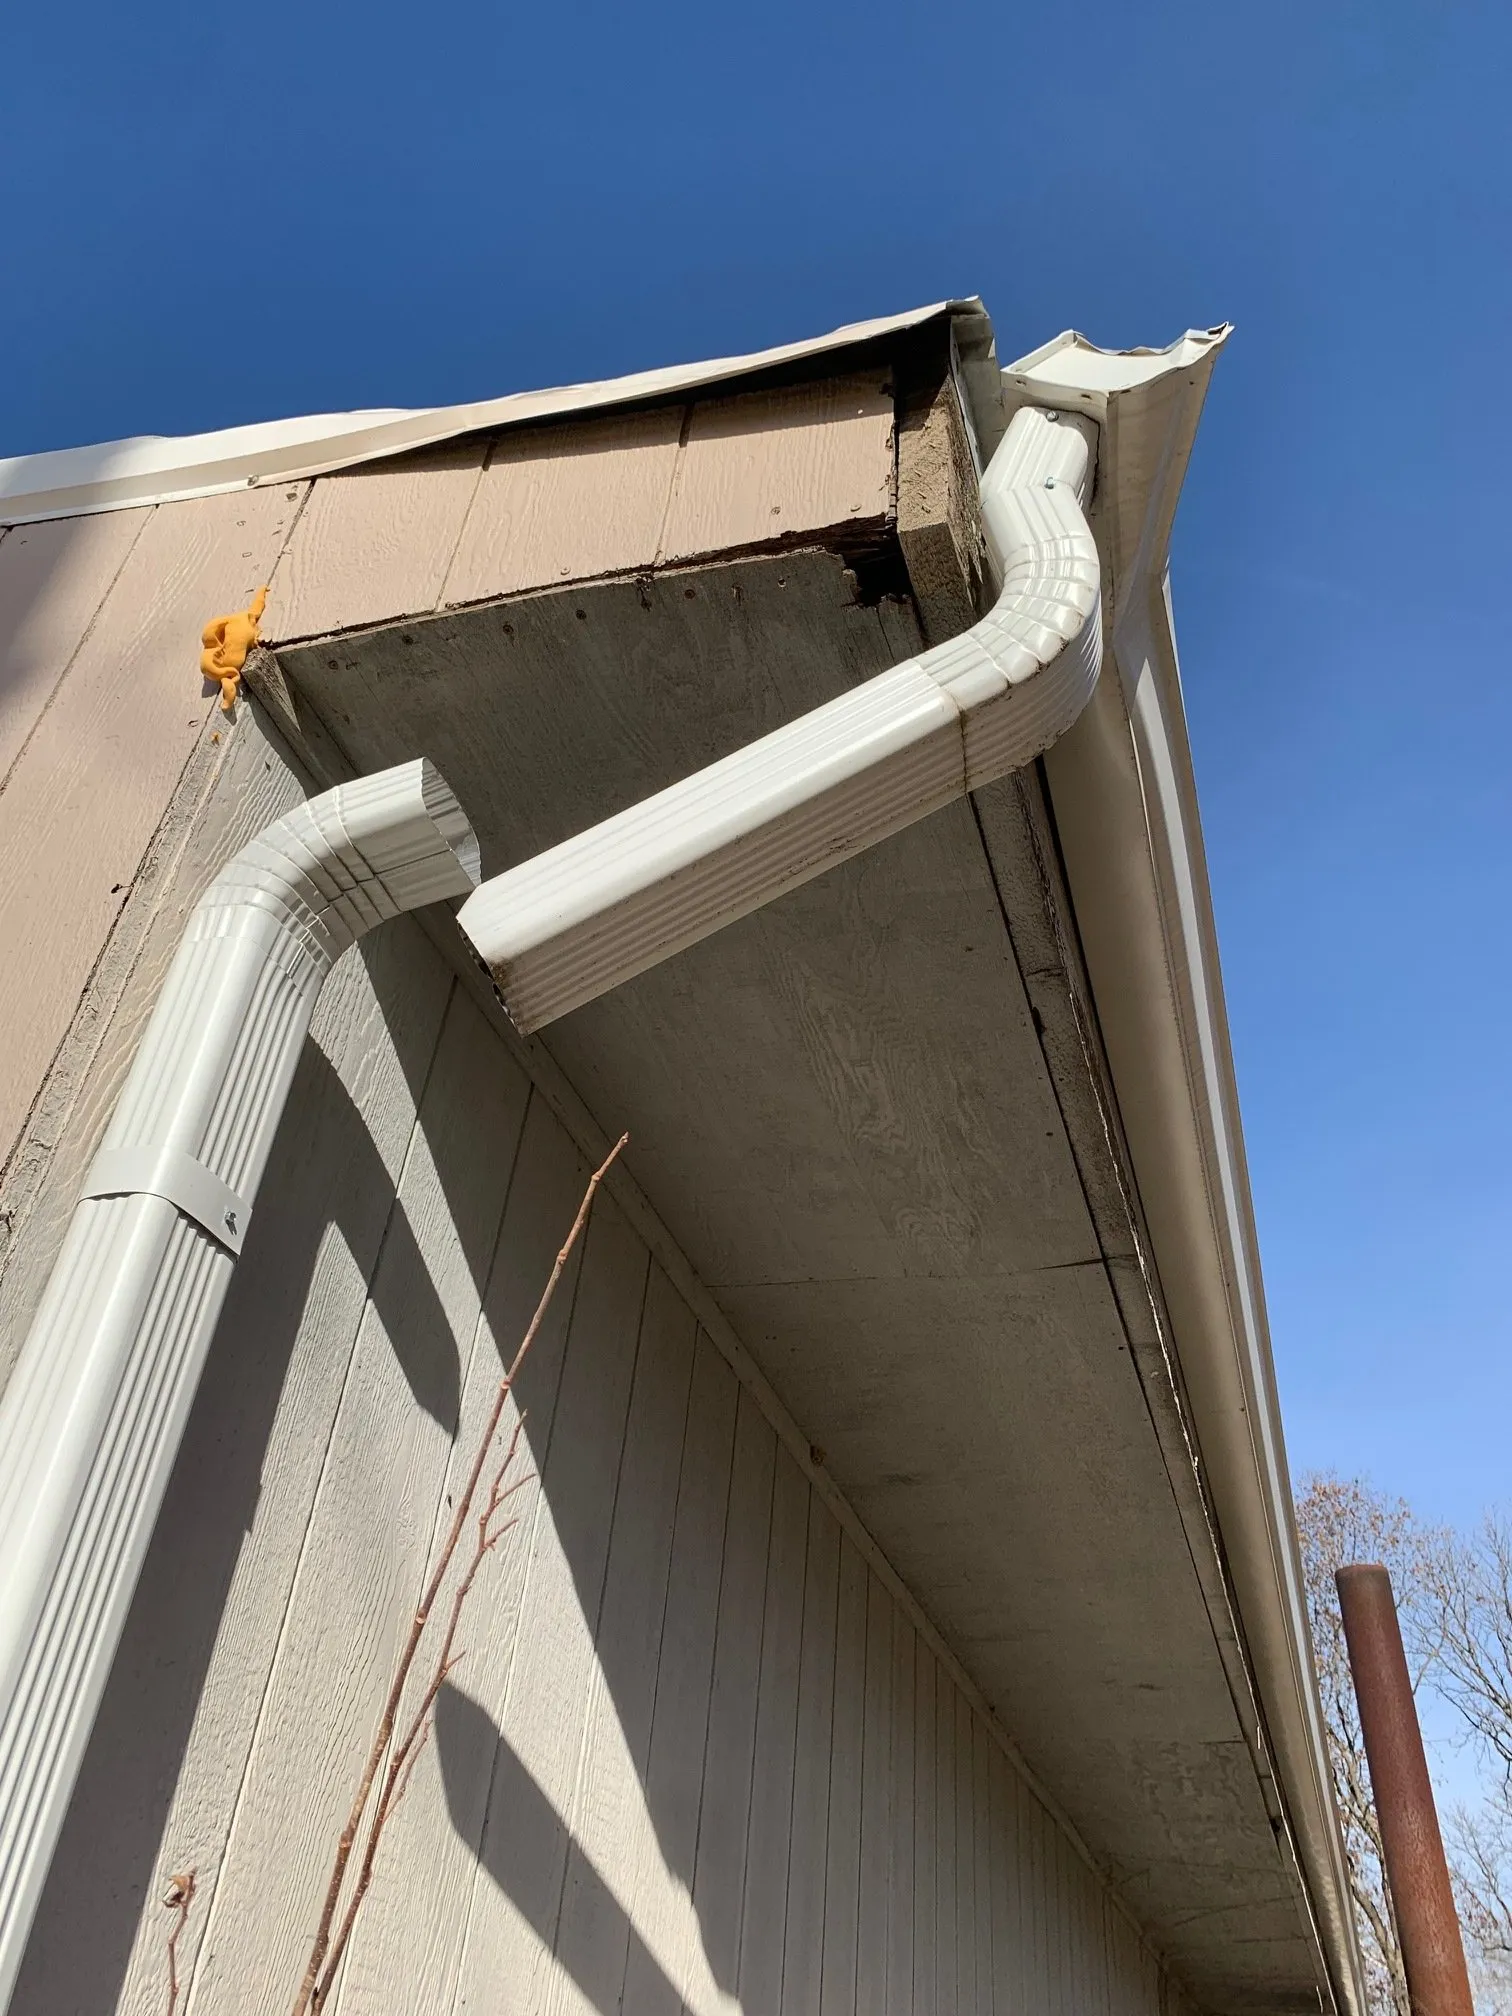 Broken gutter downspout on a commercial building in Albany Ga